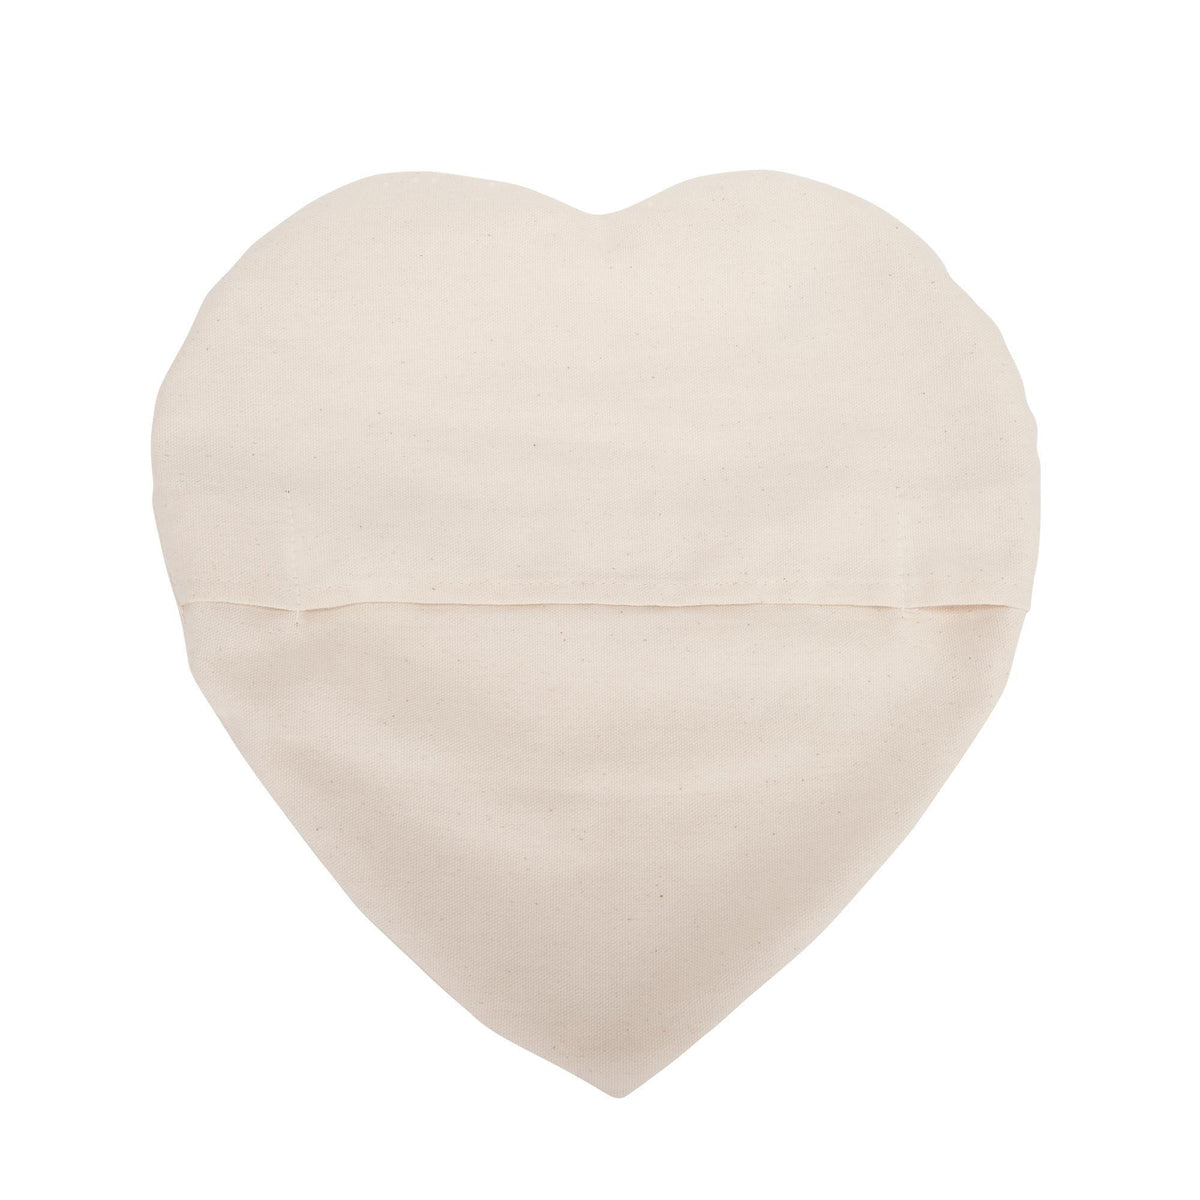 Sposh Heart-Shaped Heat Pack Replacement Covers